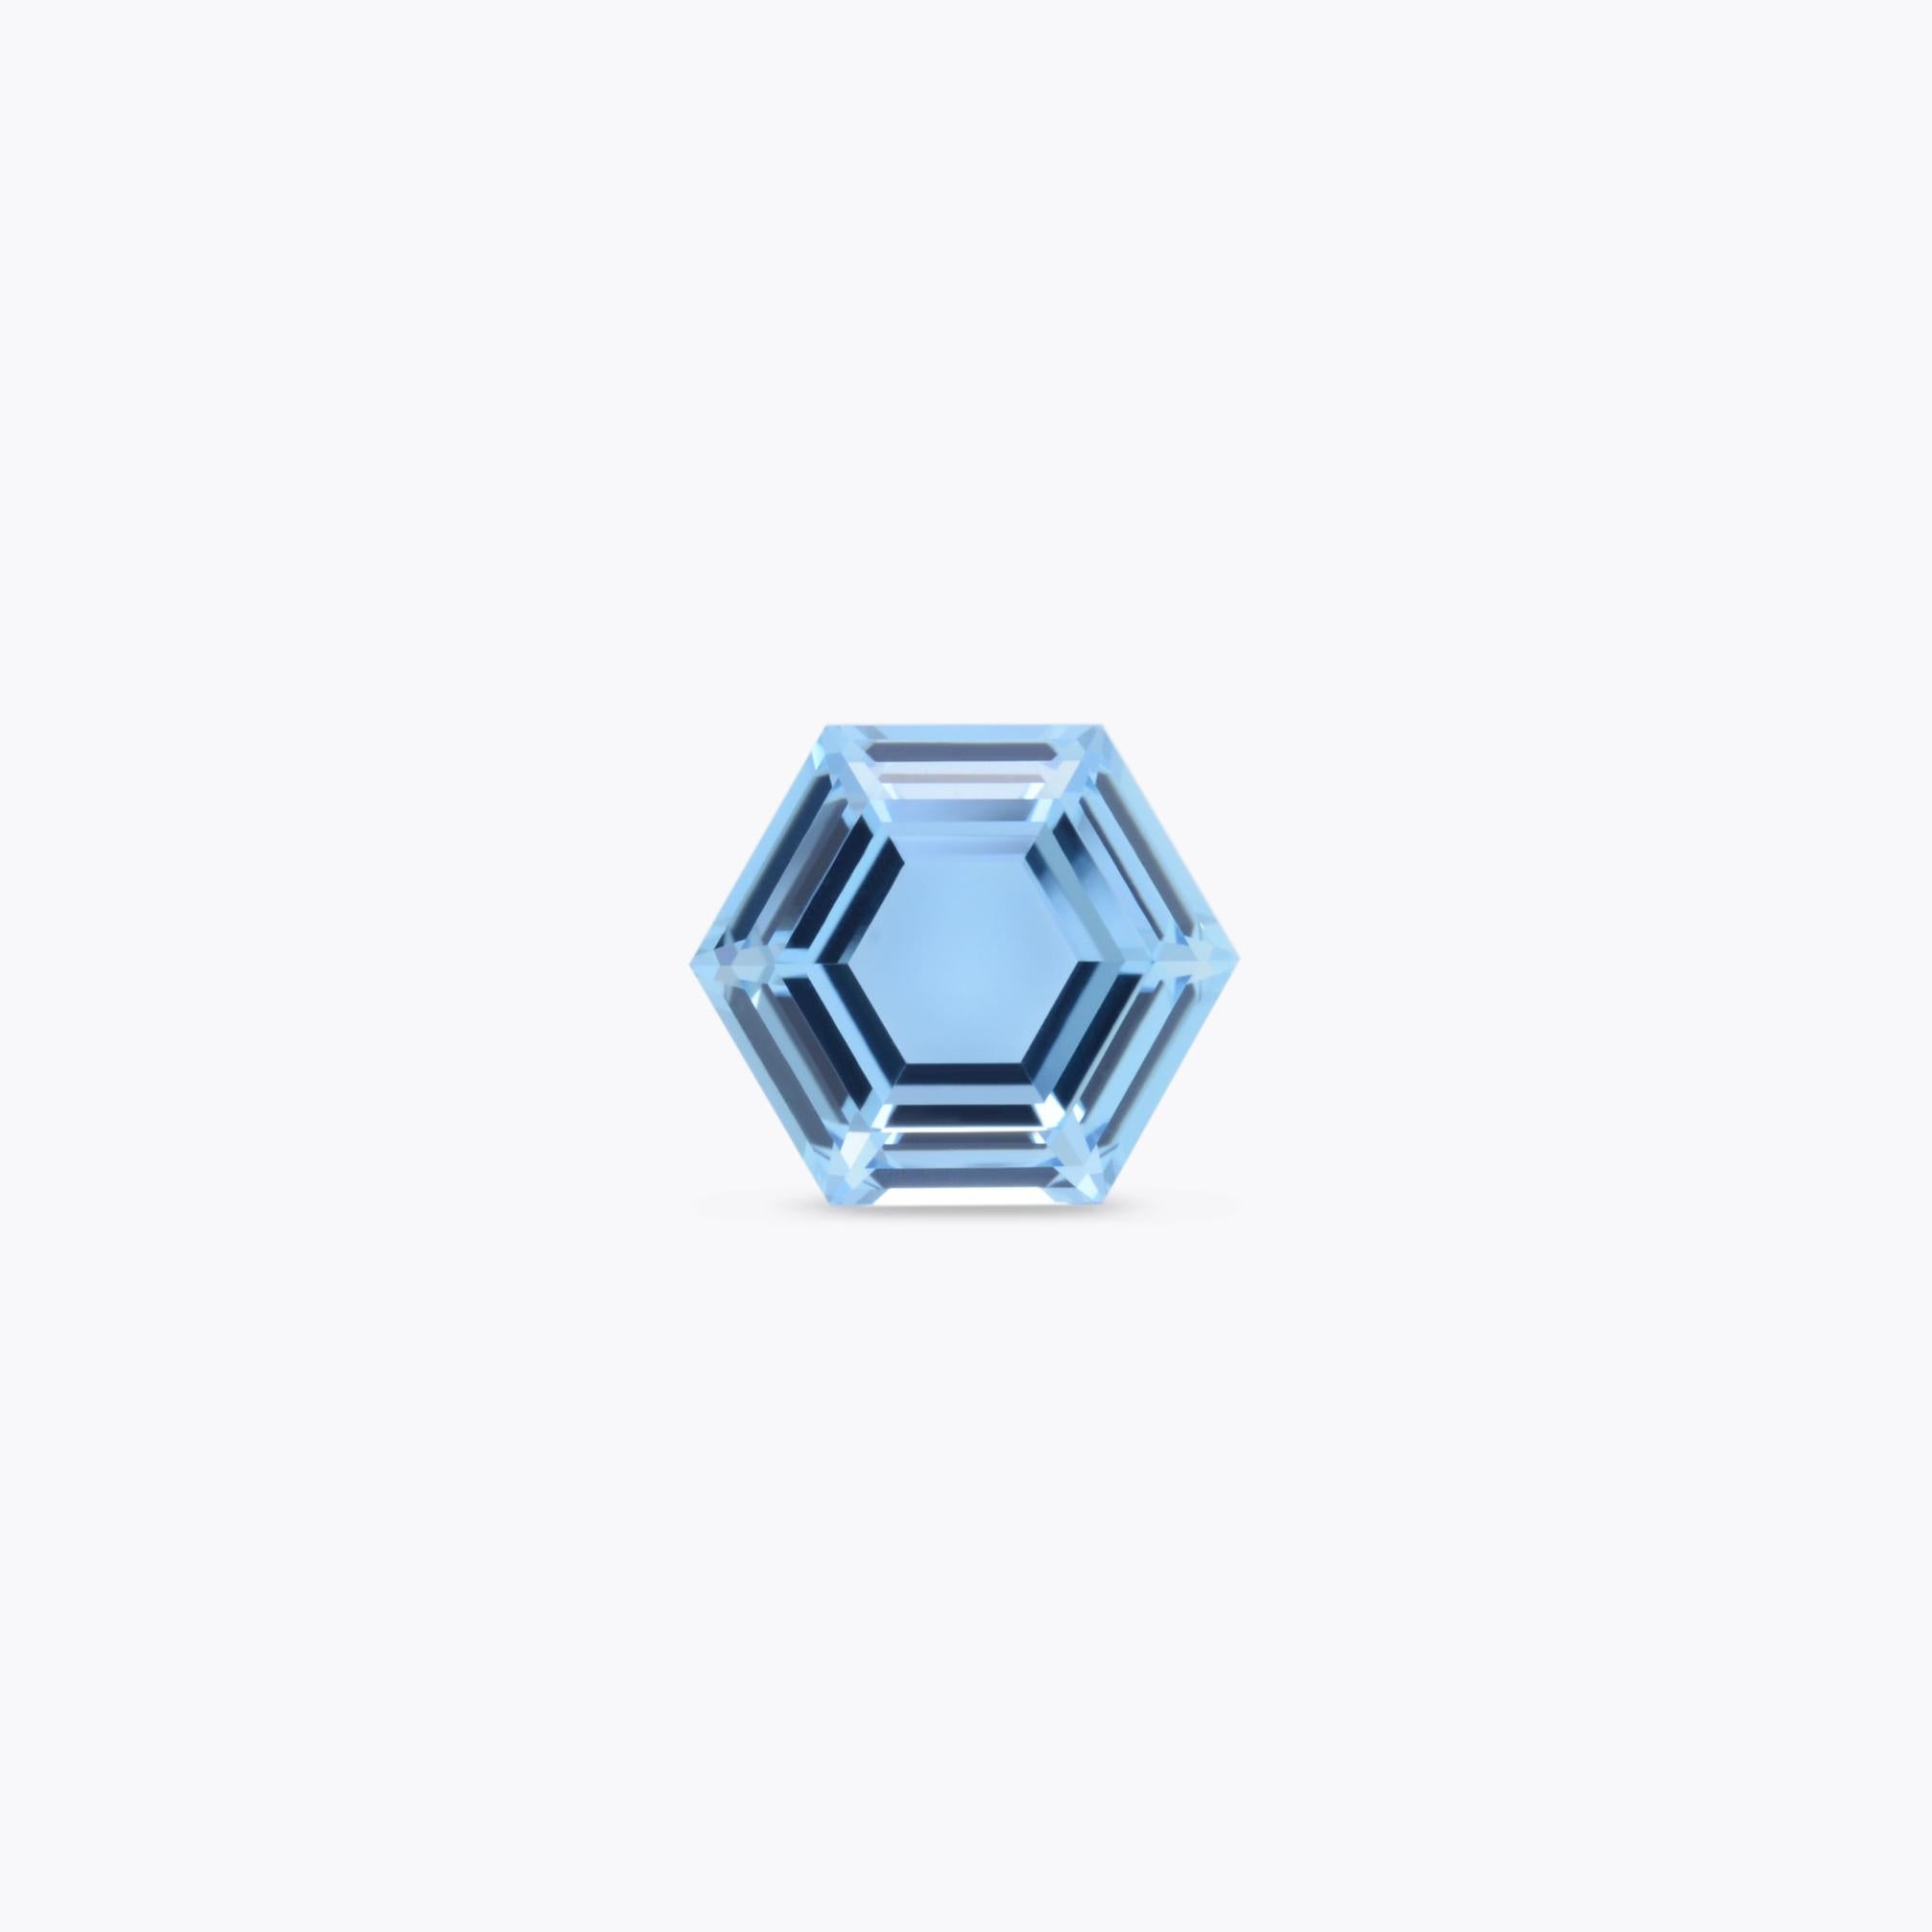 Spectacular 6.54 carat Aquamarine Hexagon unmounted gem, offered loose to a fine gemstone connoisseur.
Dimensions: 13.90 x 12.00 x 6.00 mm
Returns are accepted and paid by us within 7 days of delivery.
We offer supreme custom jewelry work upon